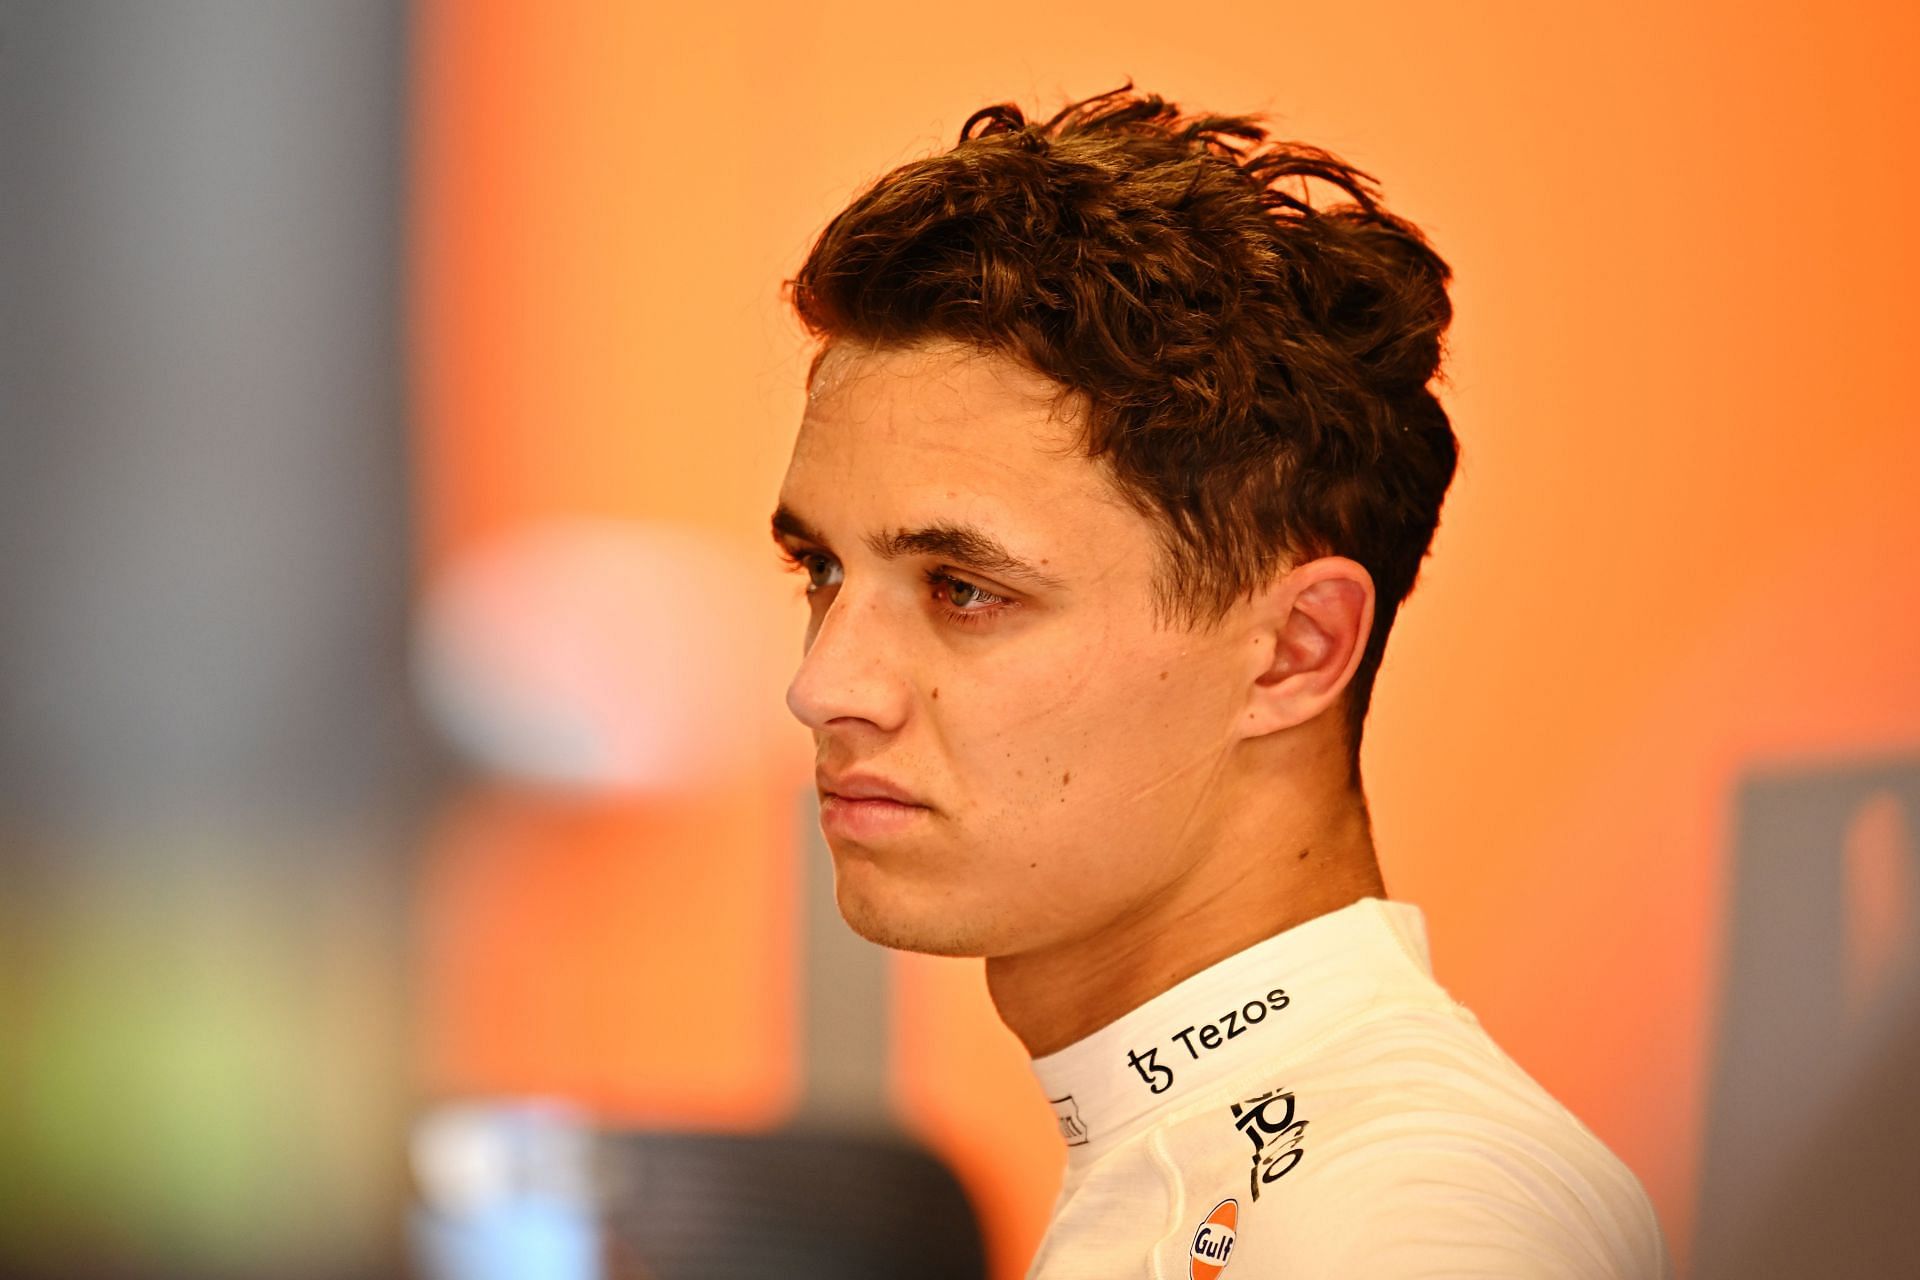 Lando Norris had his final lap in Q2 deleted that led to his elimination